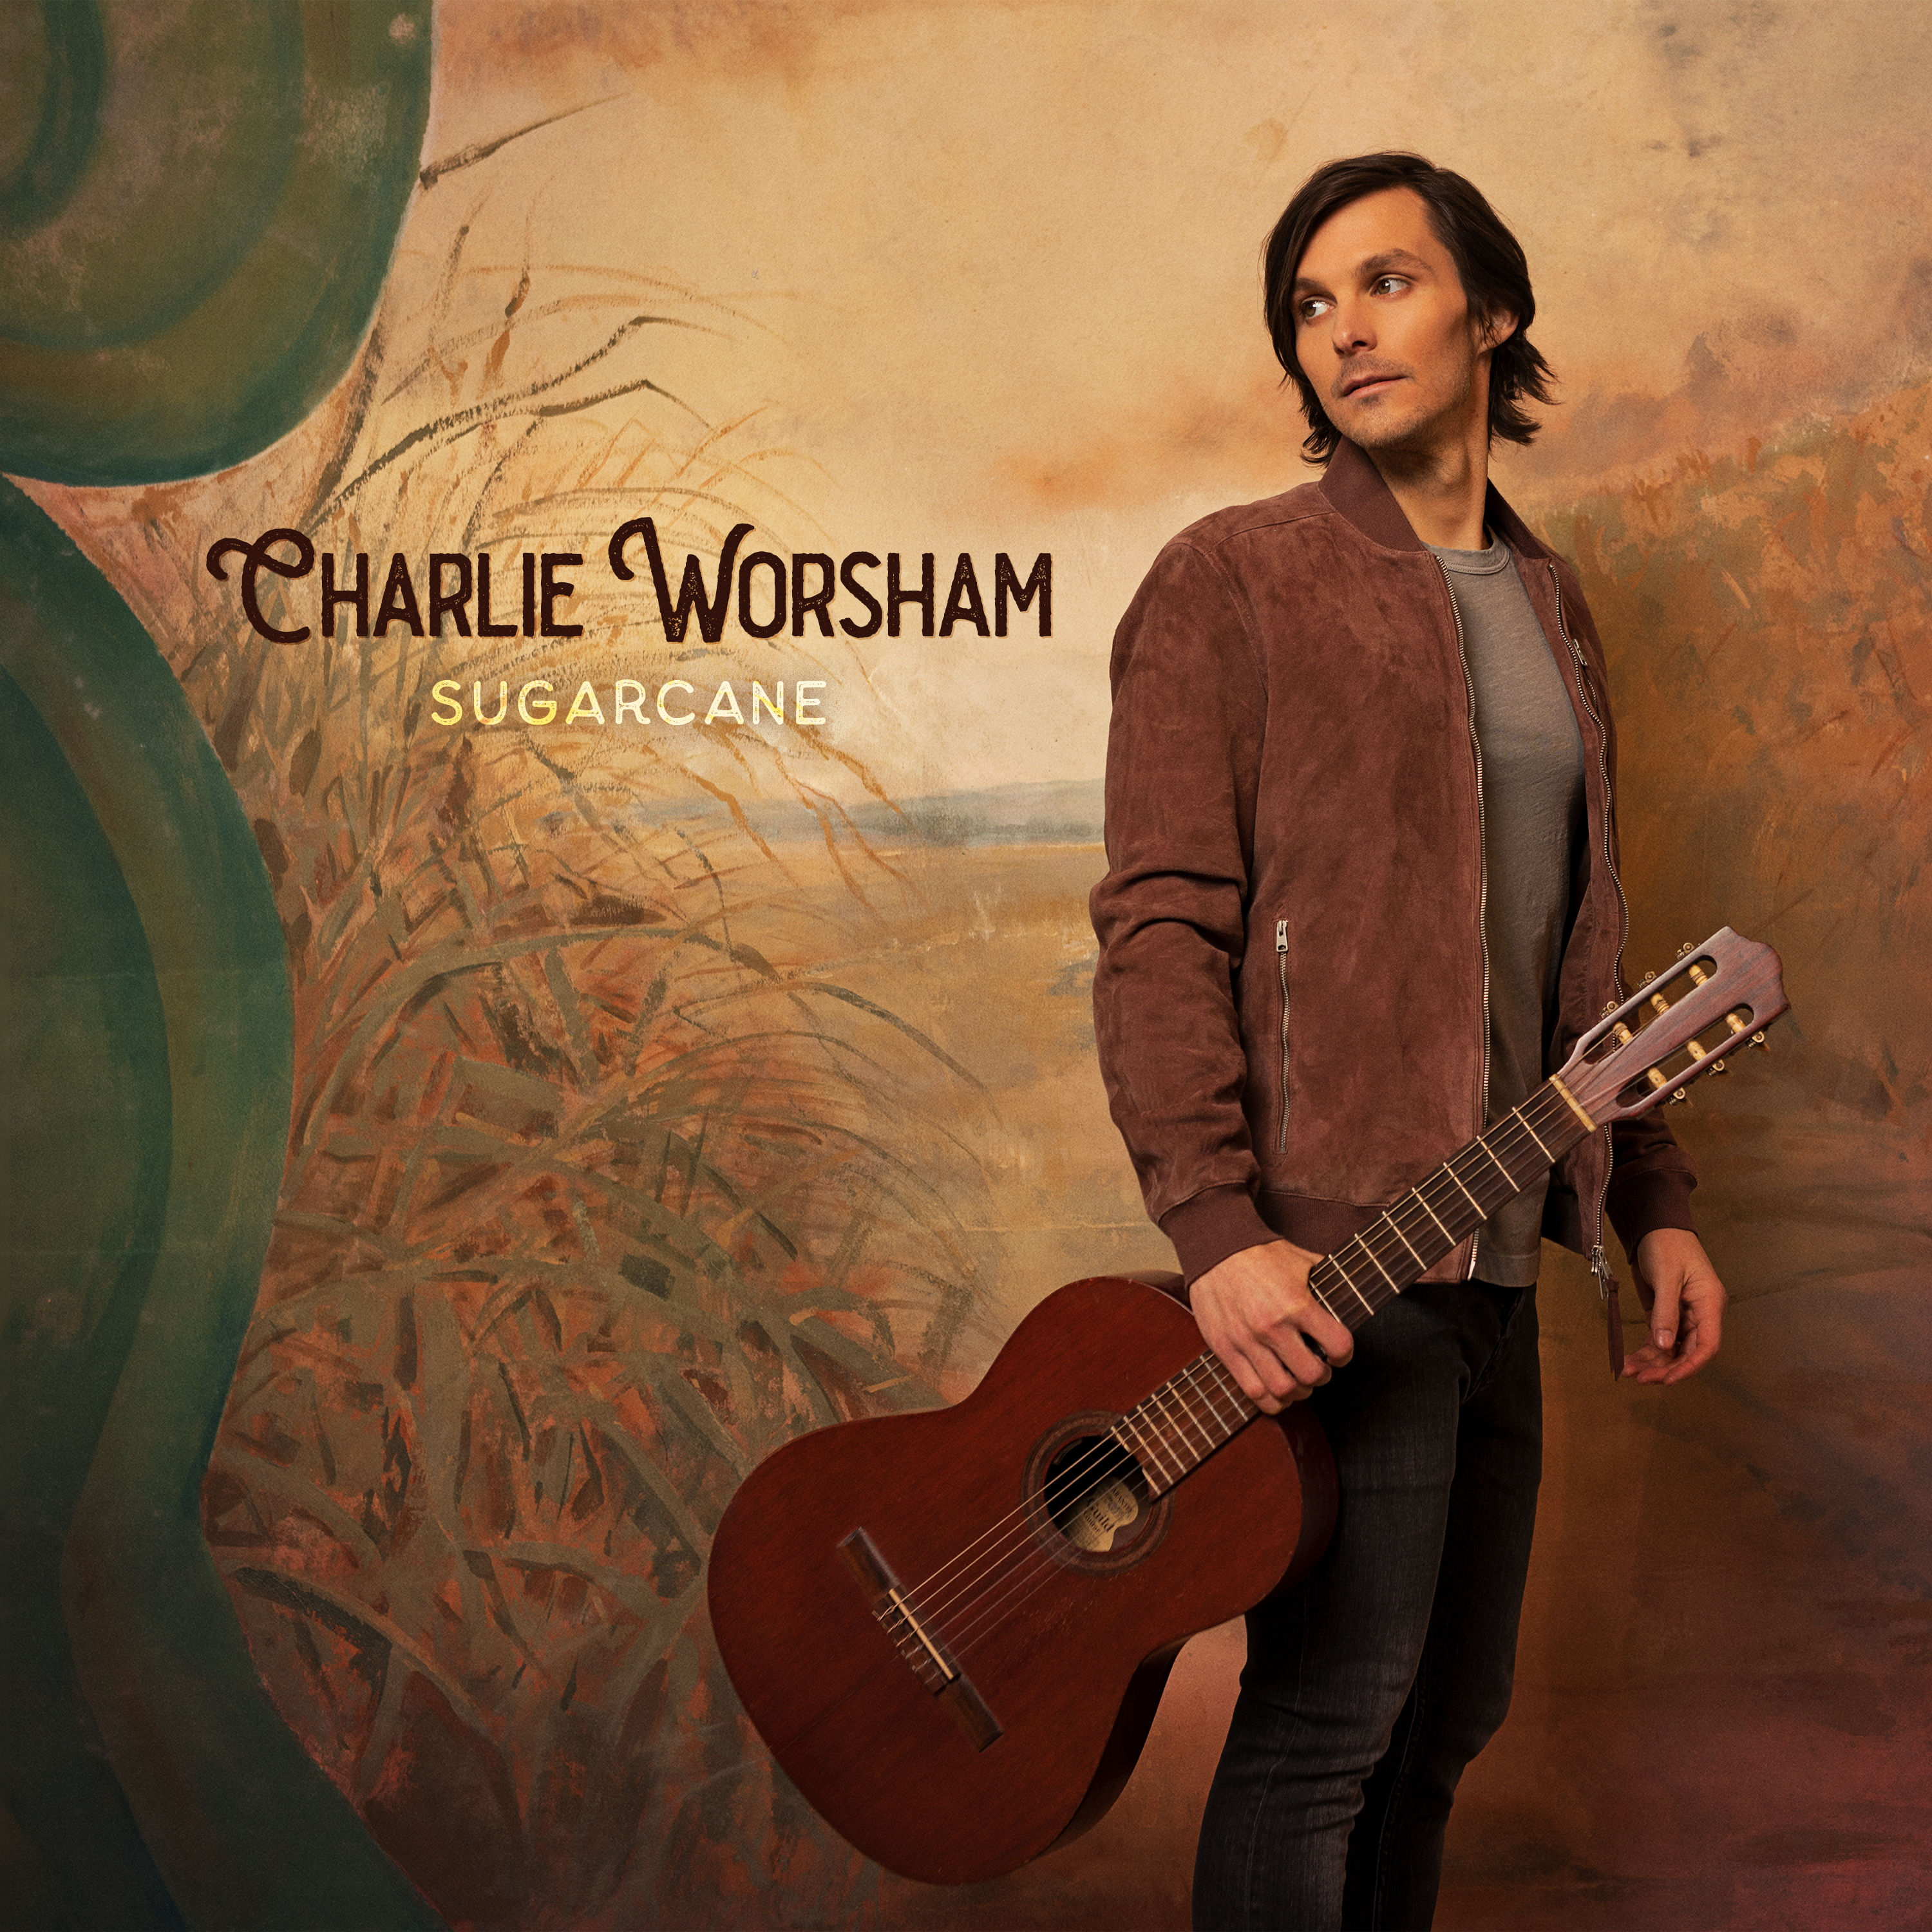 CHARLIE WORSHAM’S NEW EP "SUGARCANE" OUT TODAY